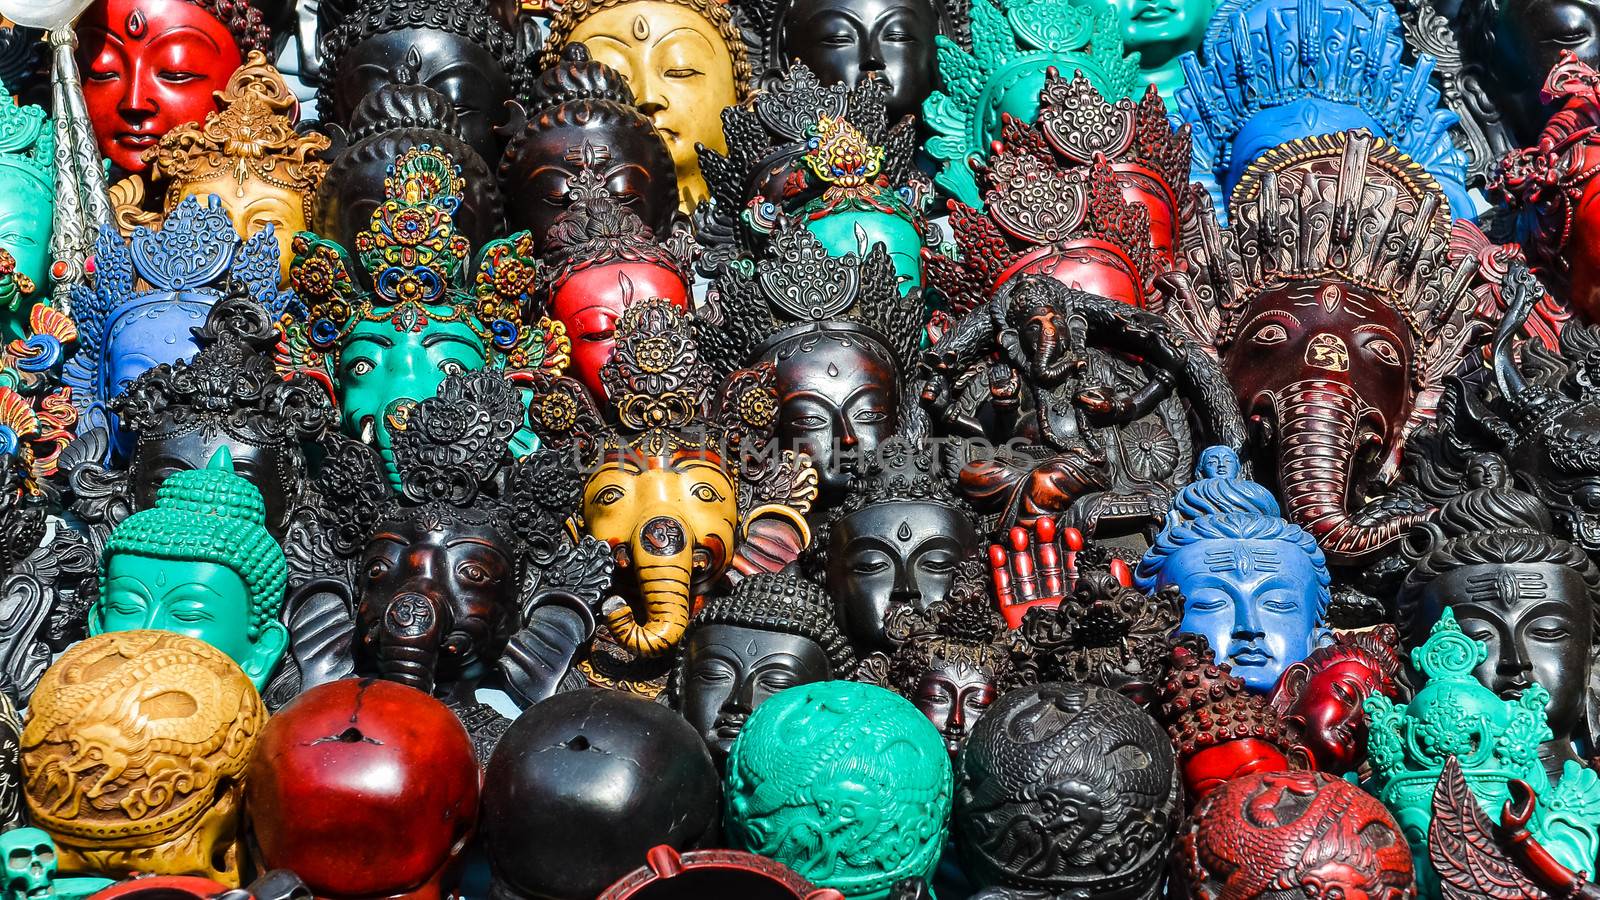 Detail of various wooden carved masks by martinm303